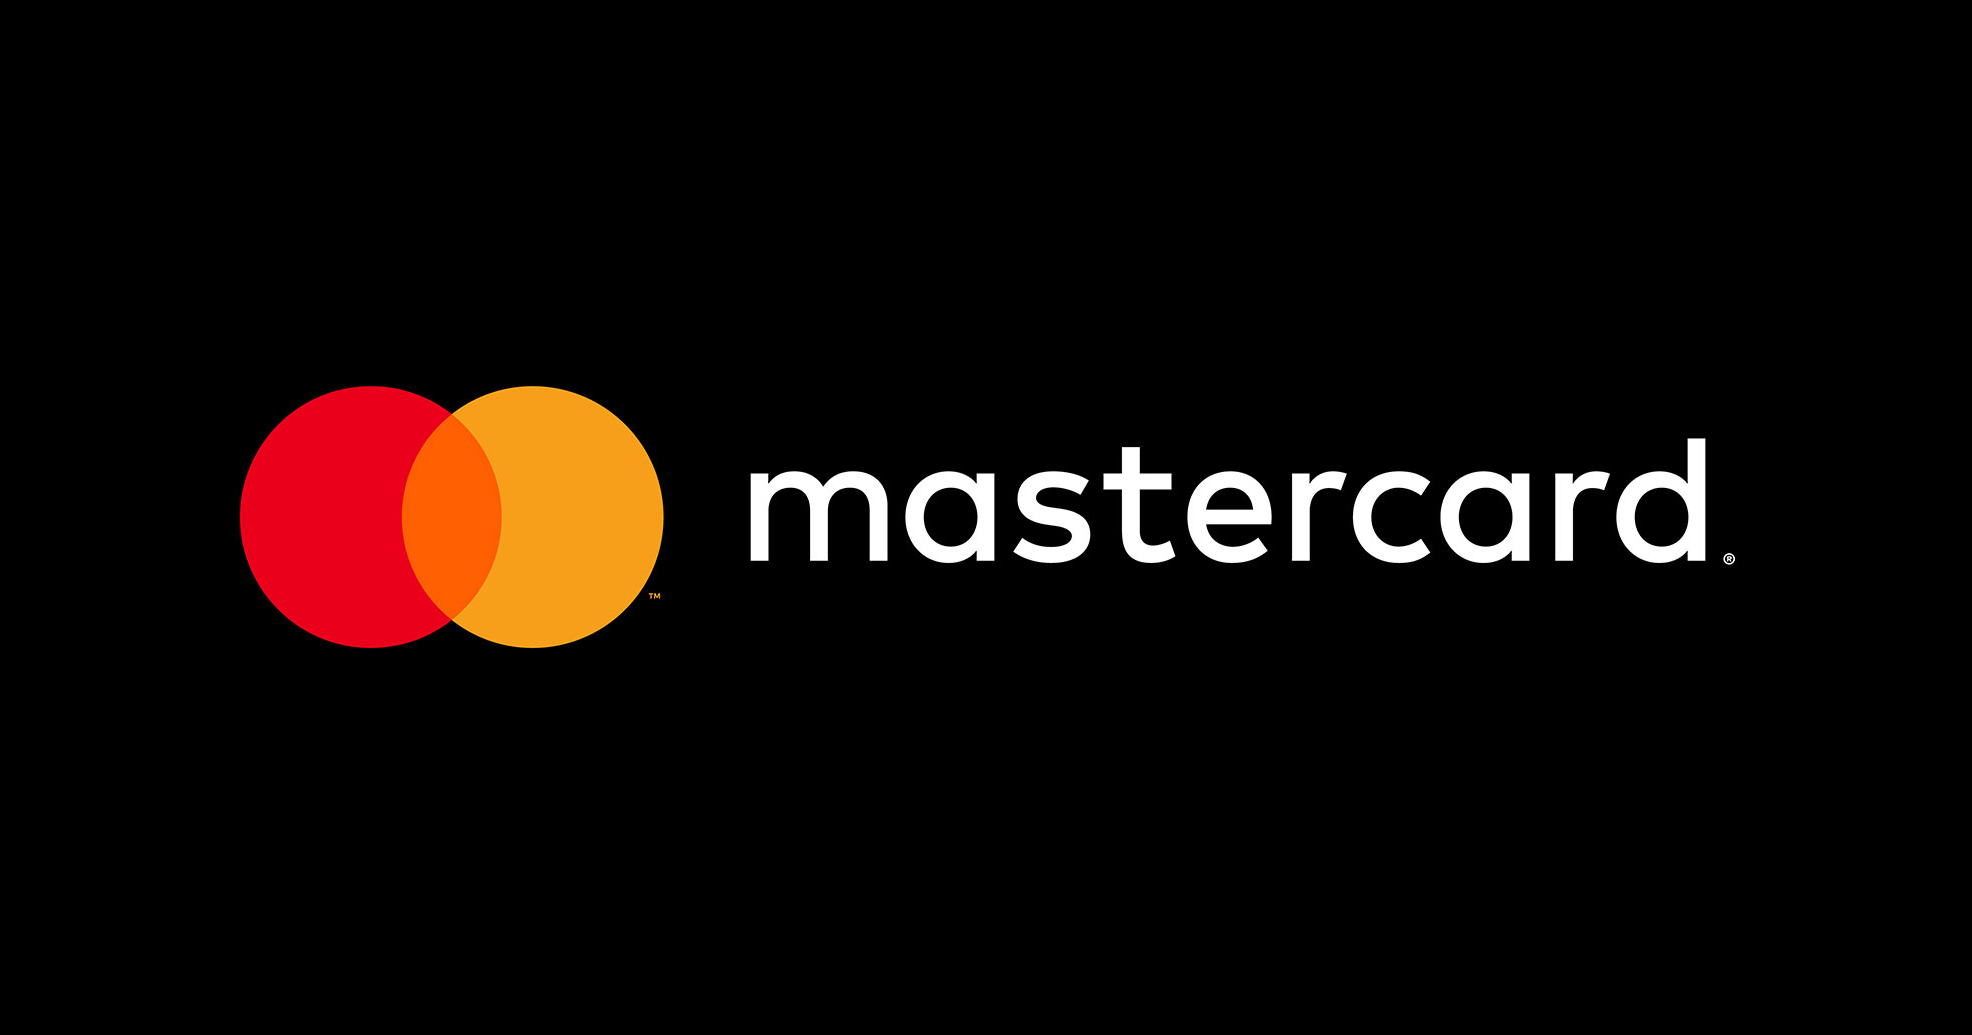 Calling all gamers: The Mastercard Gamer Academy is open for submissions